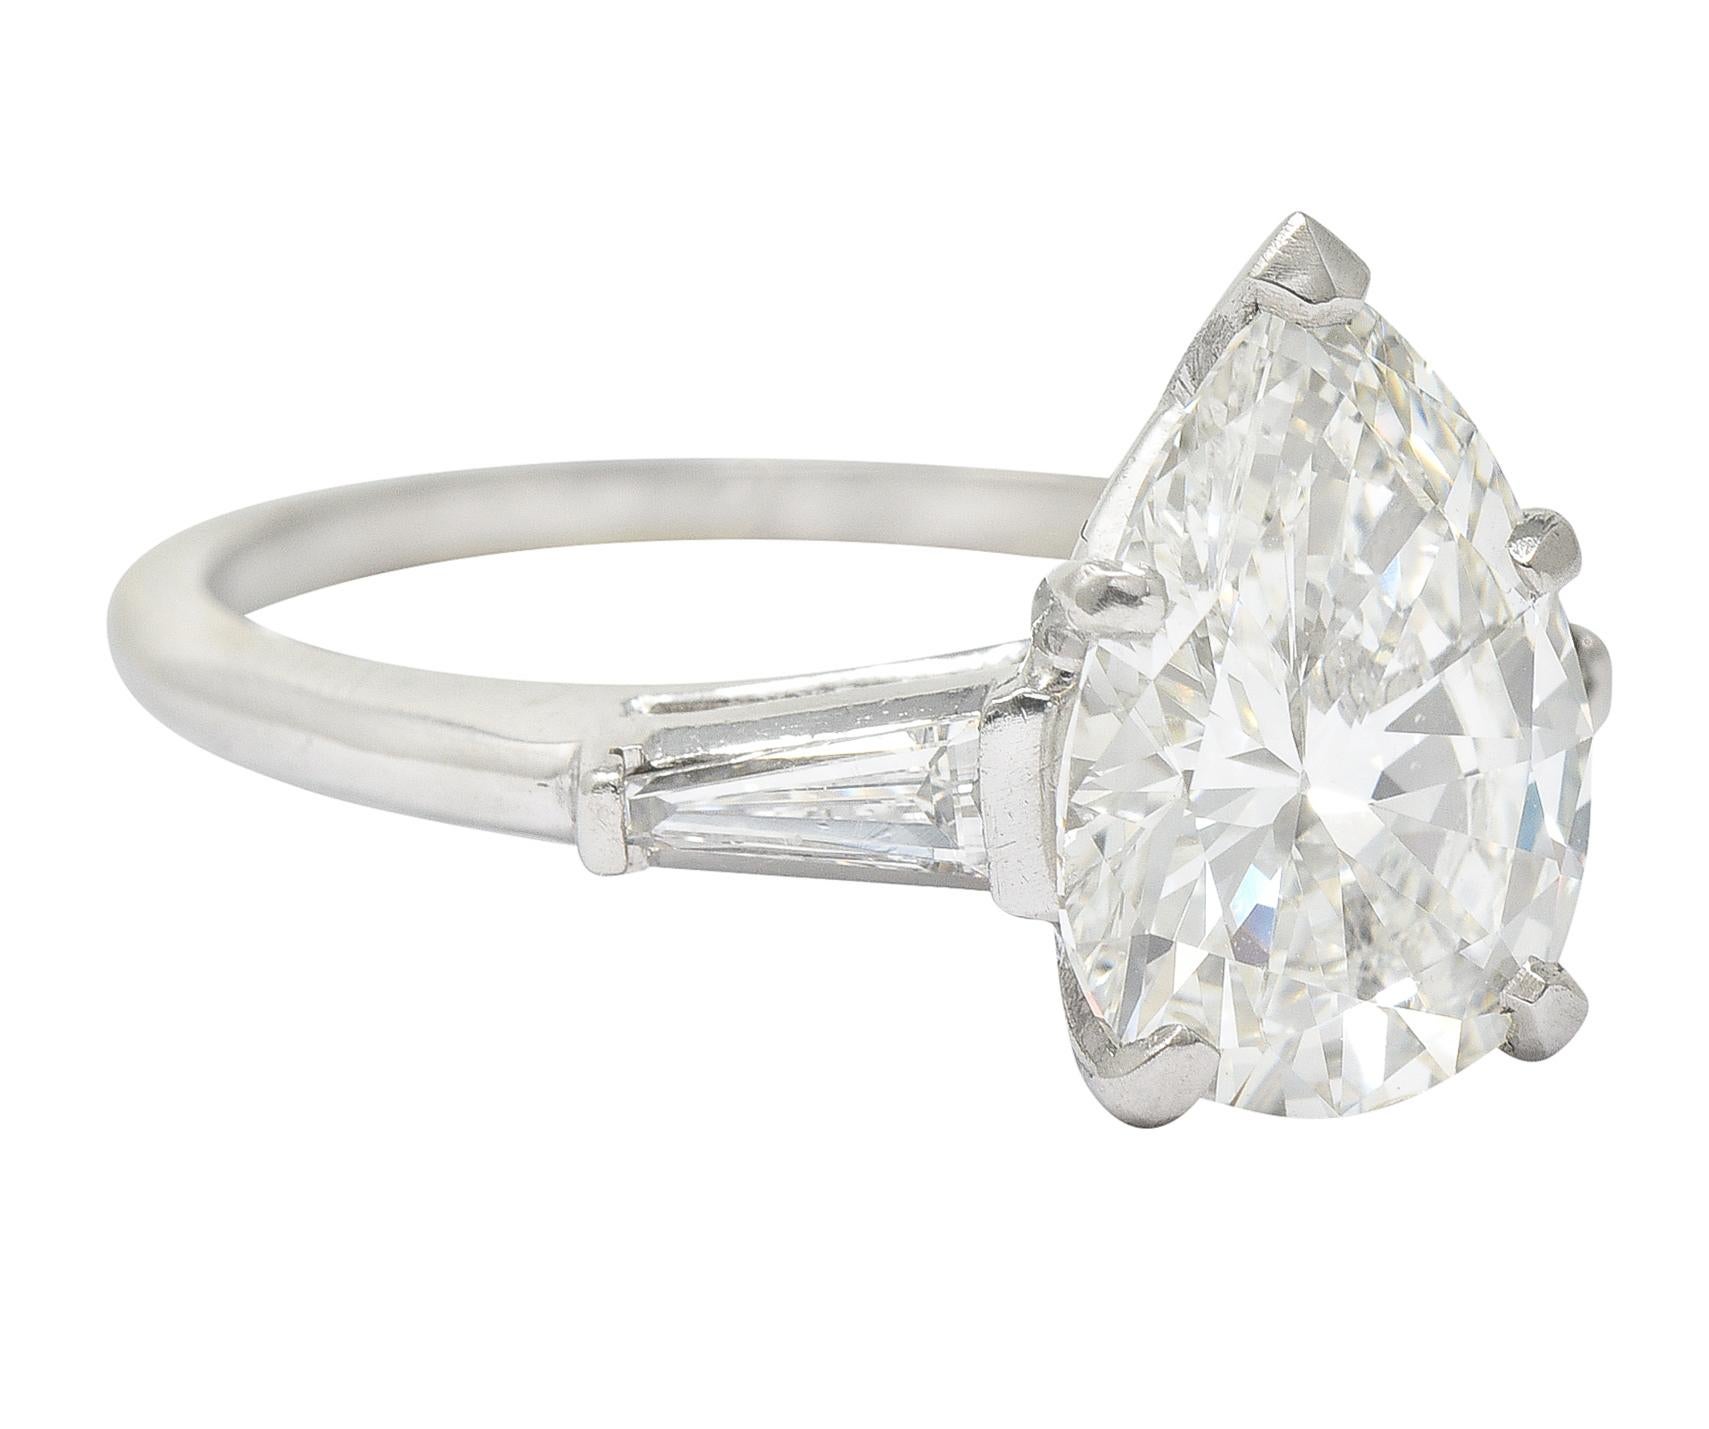 Engagement ring centers a pear cut diamond weighing 3.16 carats total - I color with VS2 clarity. Prong set in basket and flanked by cathedral shoulders with bar set tapered baguette cut diamonds. Weighing approximately 0.40 carat total - I color